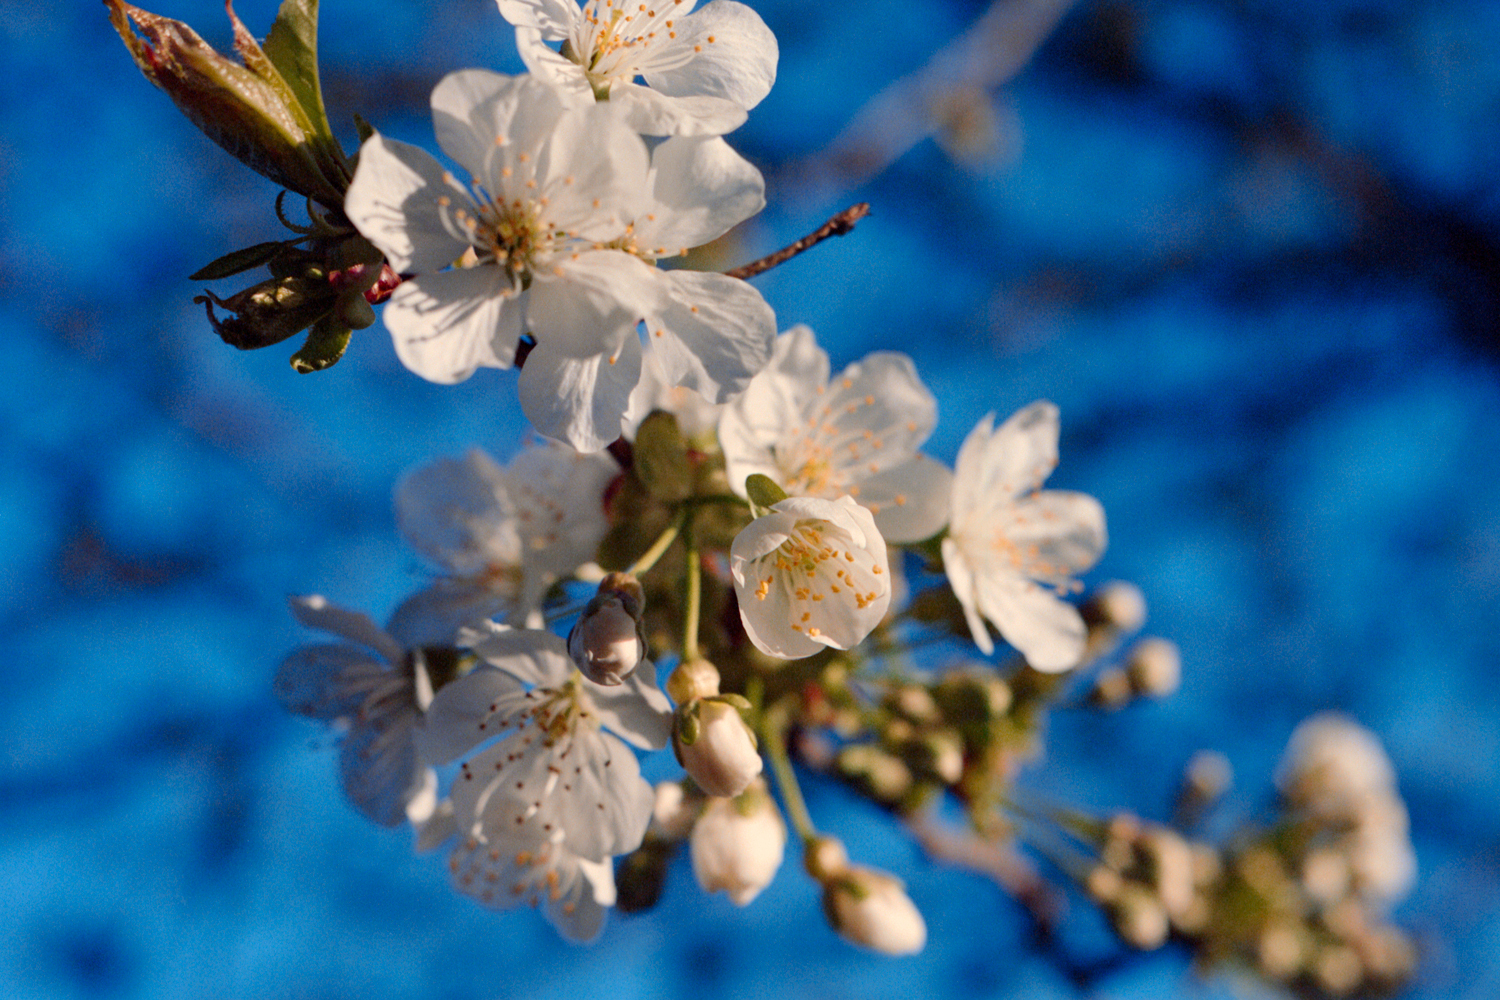 Image: A close-up of a bloom of apple blossoms, white, with yellow pistils bursting out. In the background, a blue sky with tree branches reaching across the image. Photograph by Ryan Edmund Thiel.